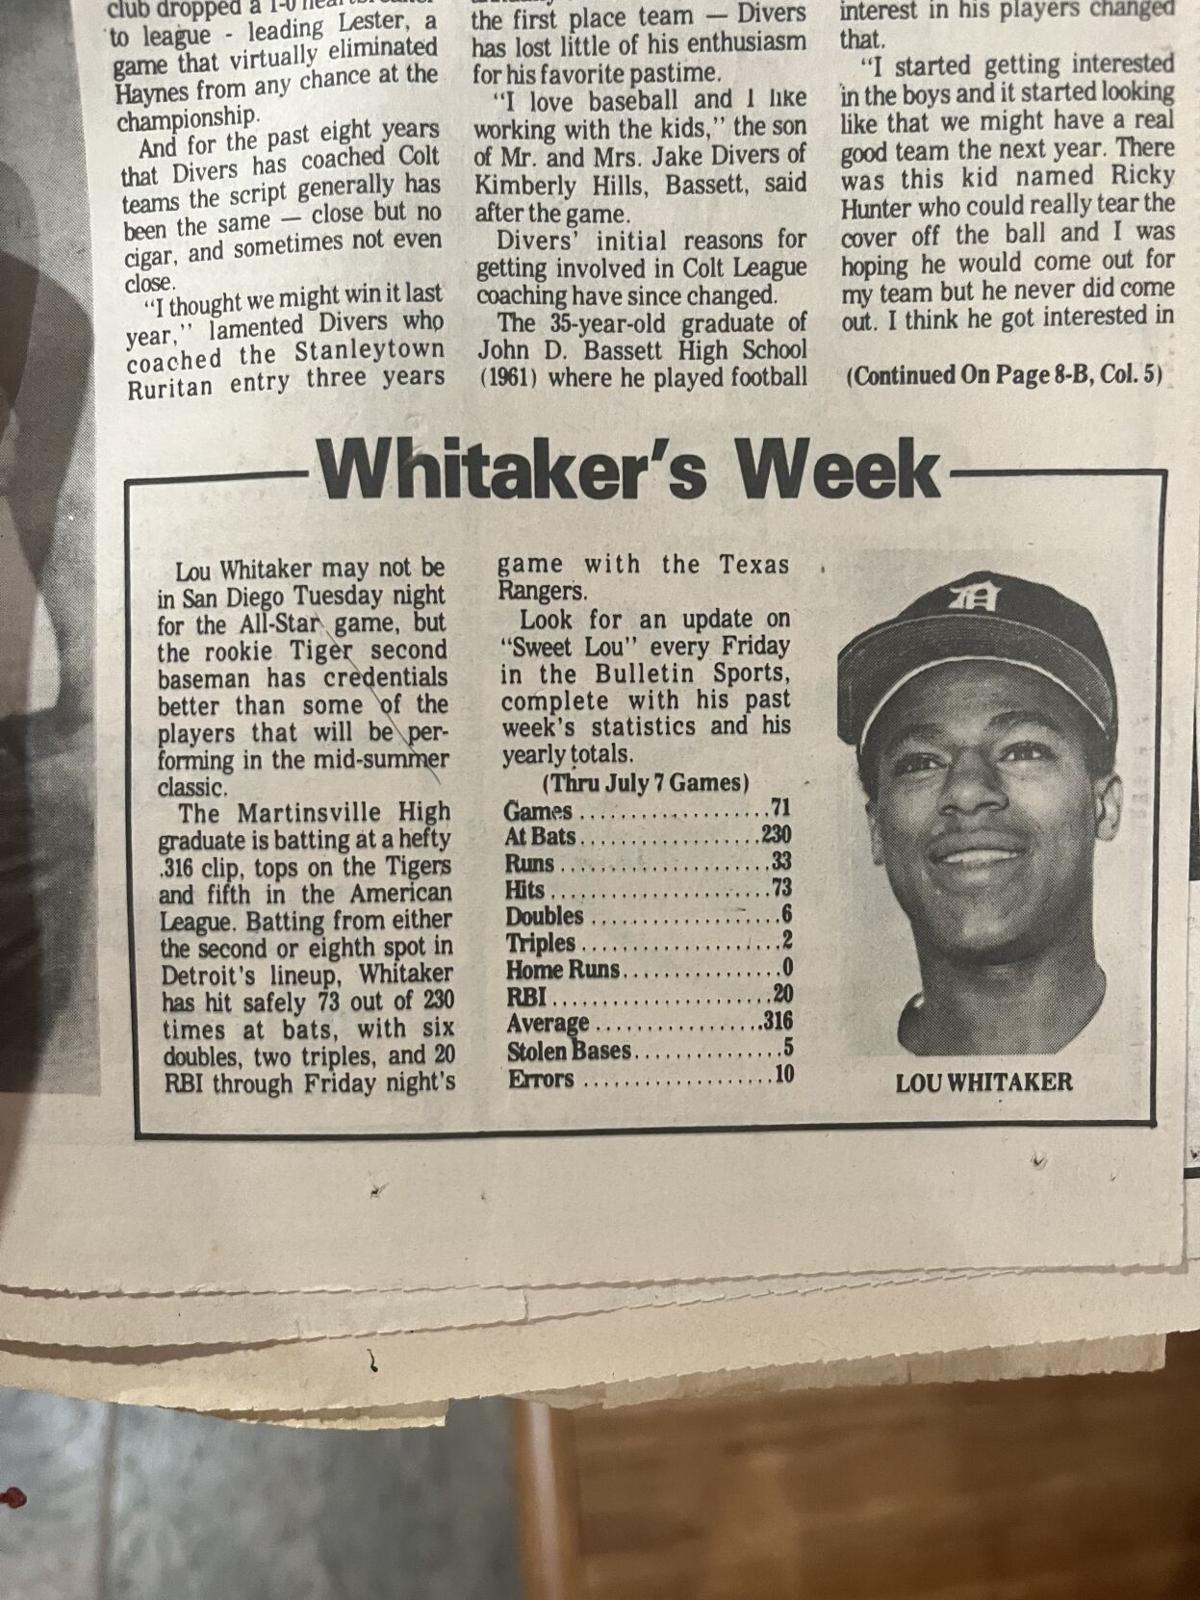 Detroit Tigers - On this day in 1984, Lou Whitaker hits a go-ahead